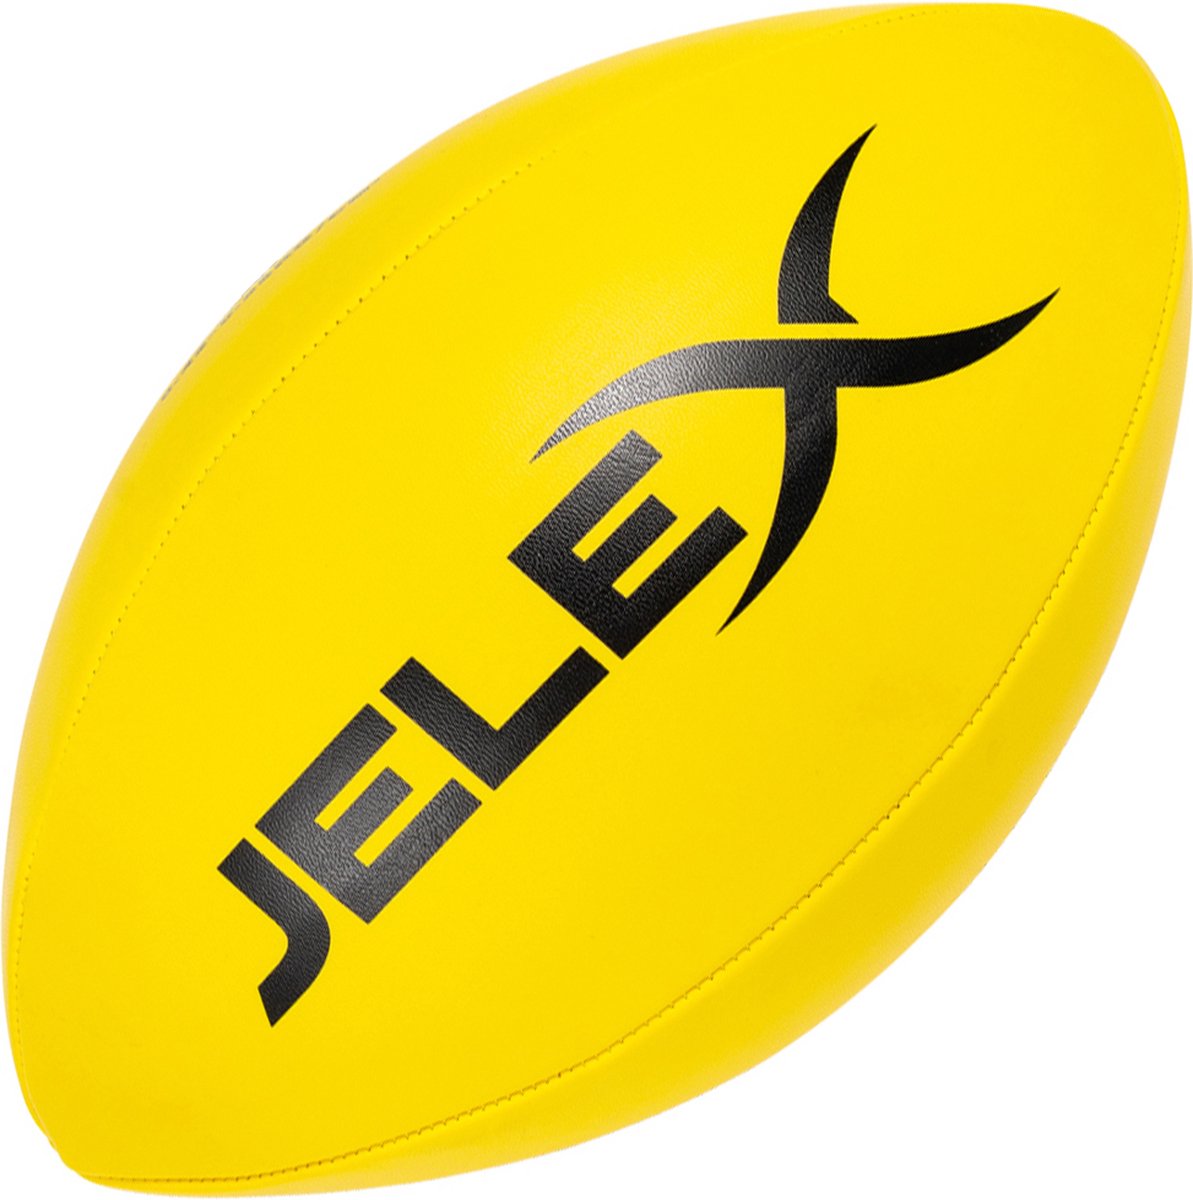 rugby bal